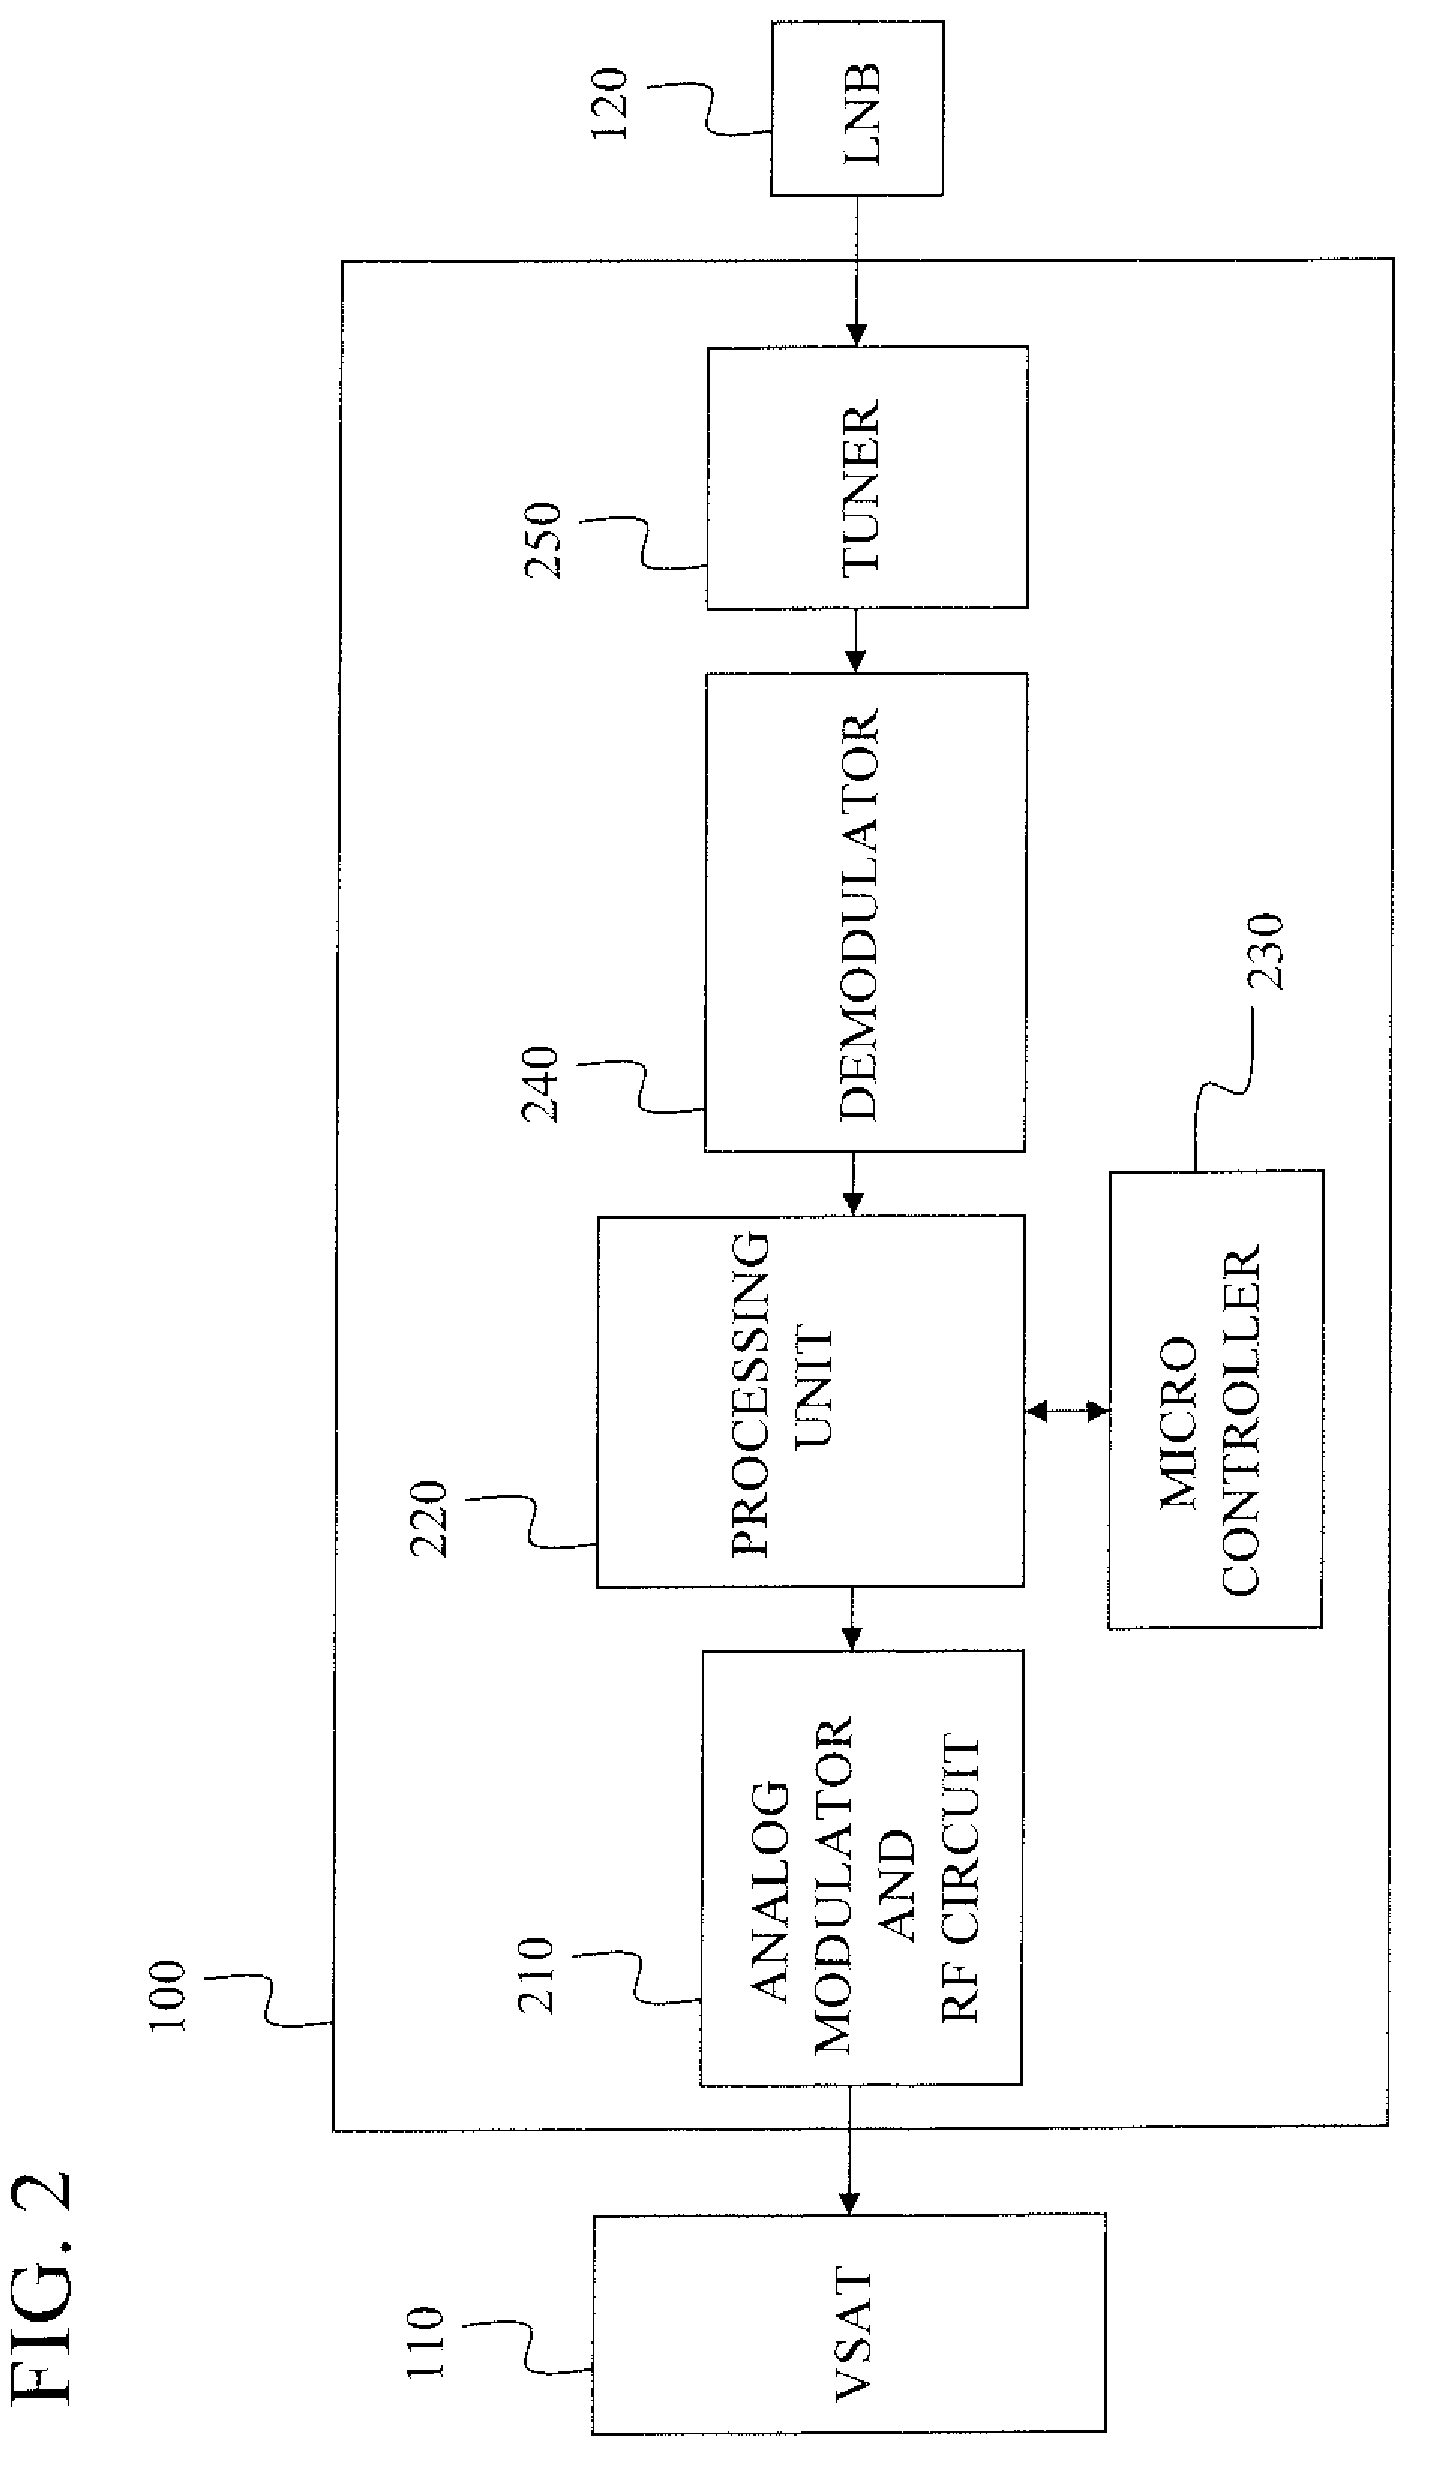 Transmodulator for very small aperture terminals employing internet protocol based communications